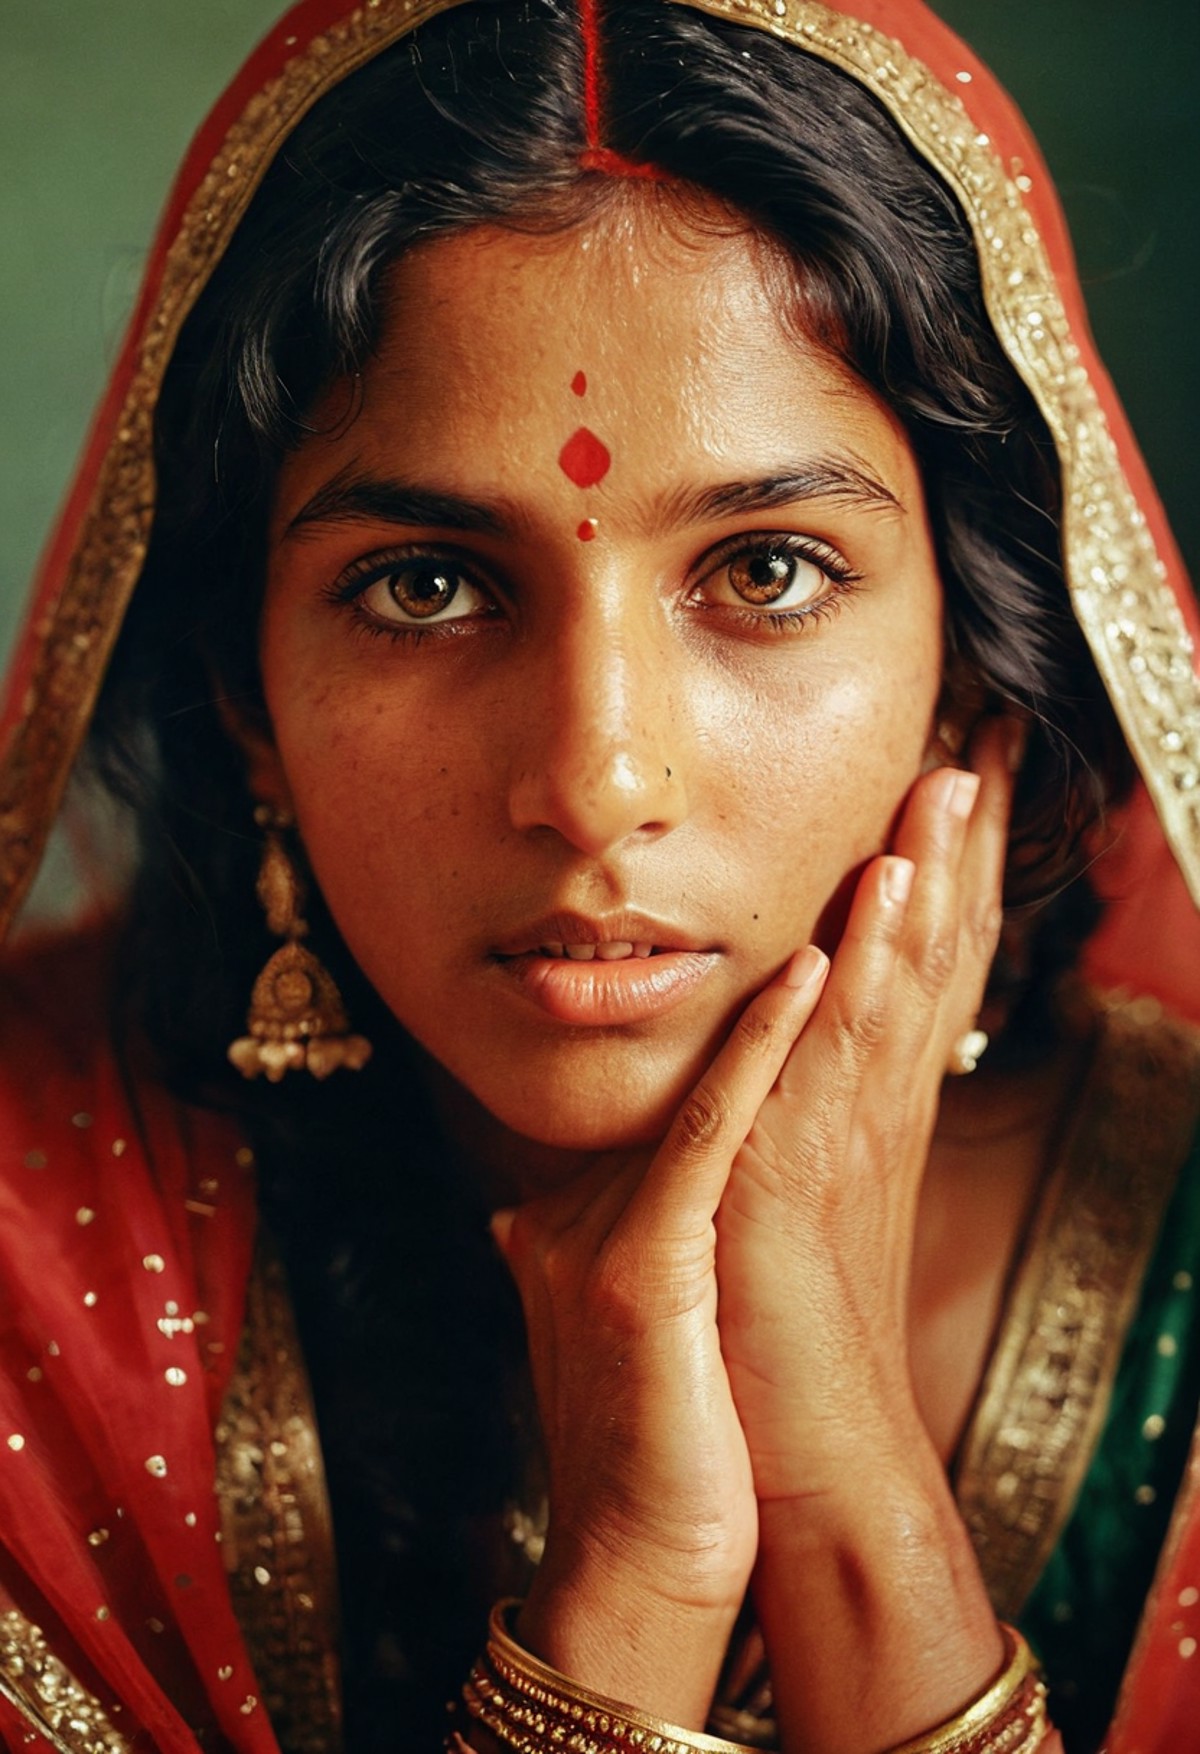 RAW textured photography by Guy Aroch and Steve McCurry, goddess, passionate god-like beautiful 30 years old Indian flexib...